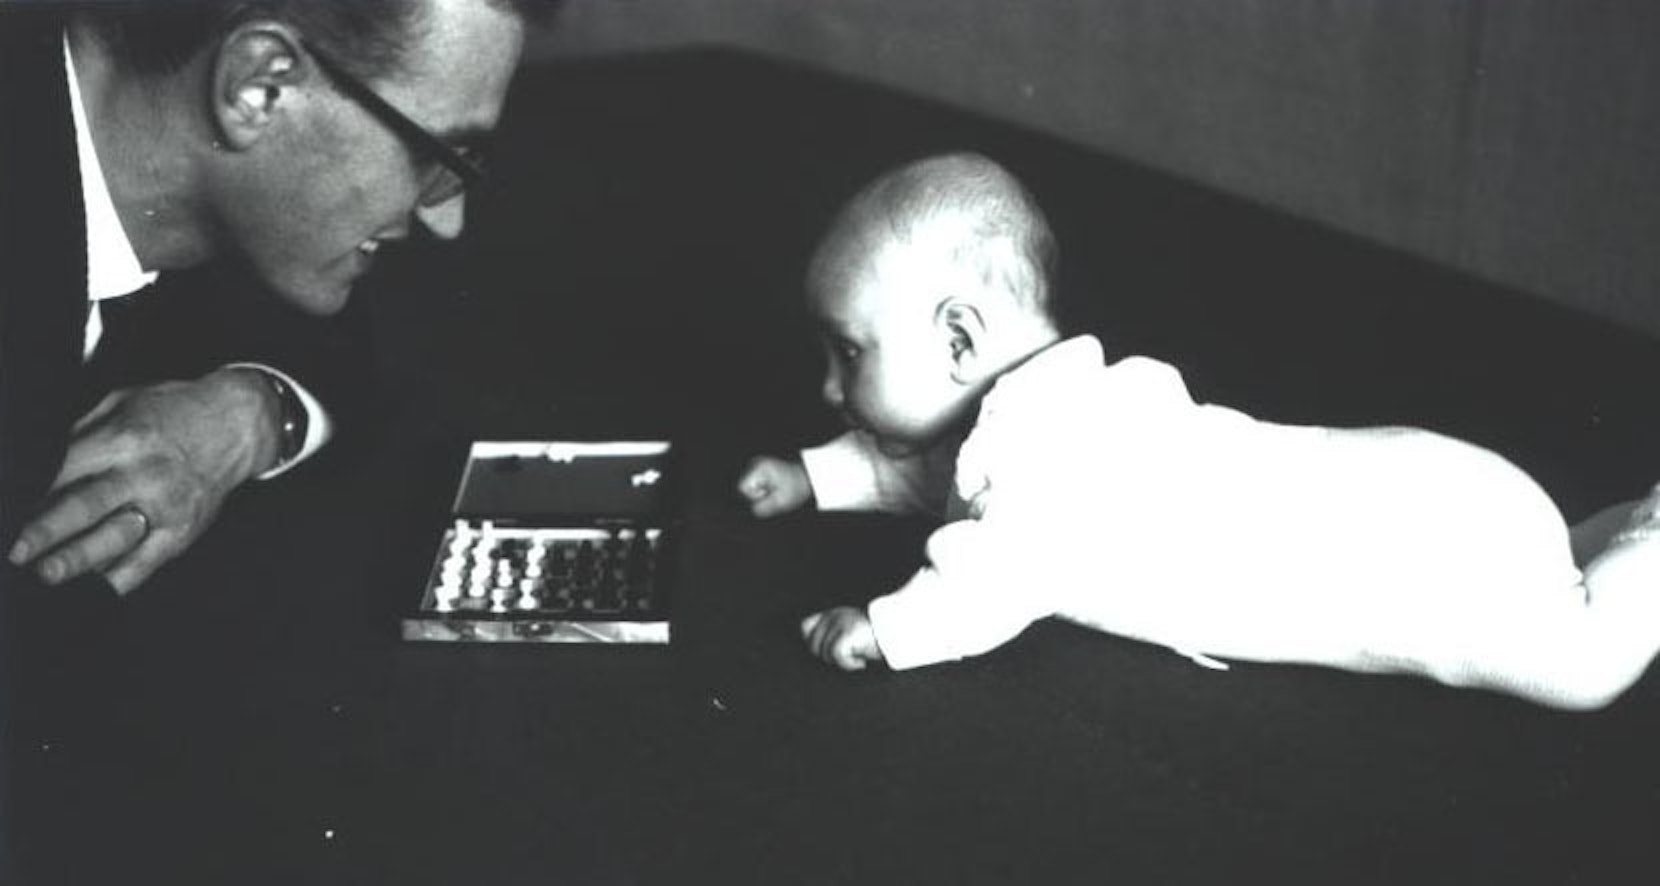 A photo from 1963 of Jürgen with his father, Johann Schmidhuber, playing chess.